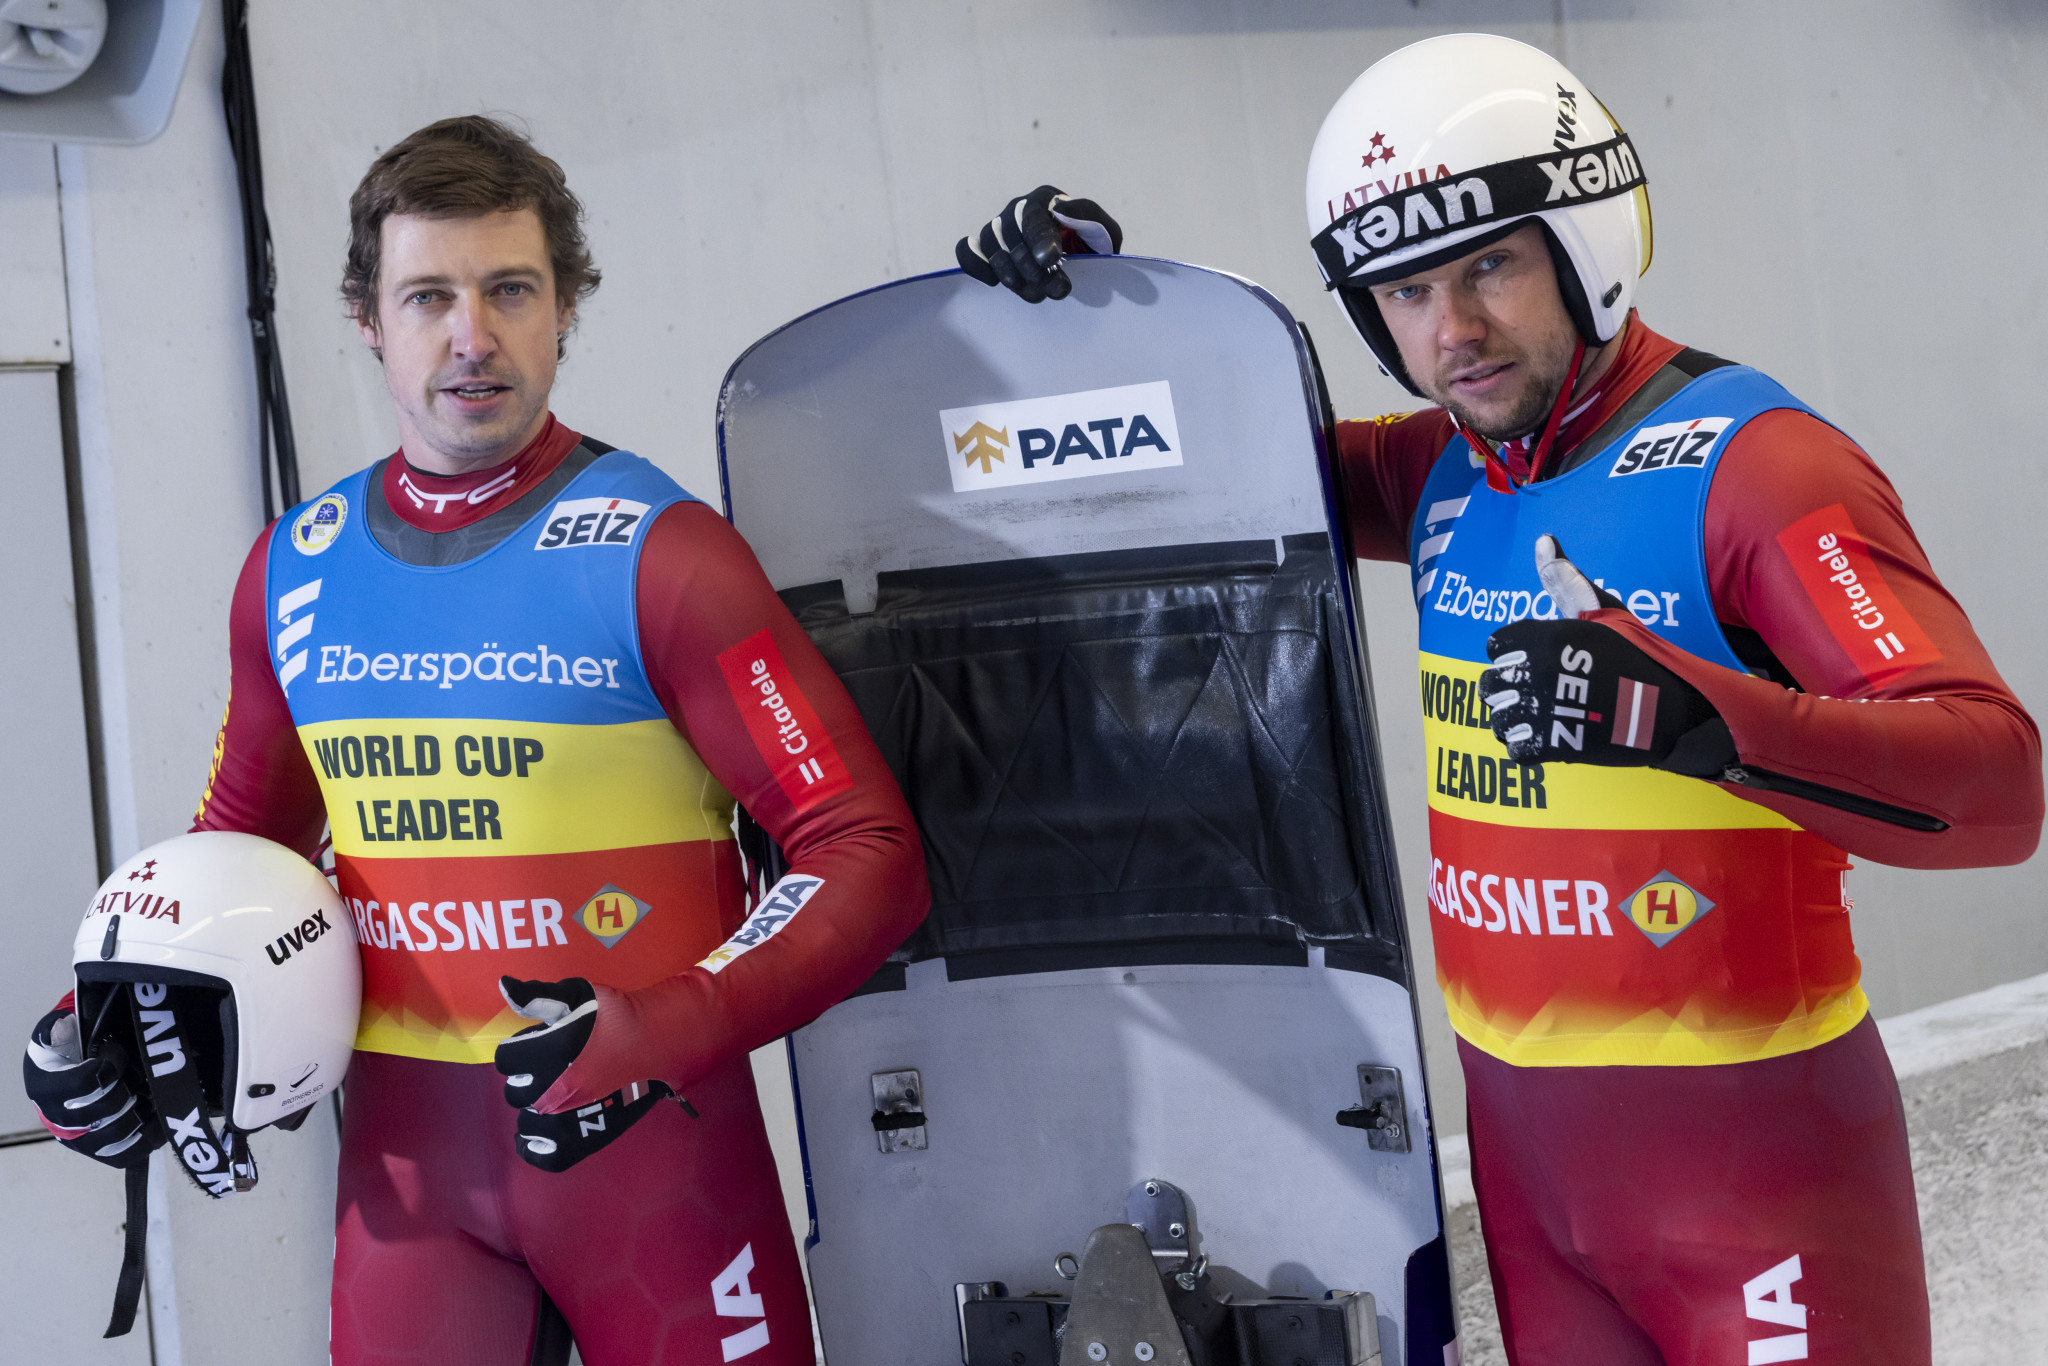 Šics brothers aim to excel on home soil at Sigulda Luge World Cup